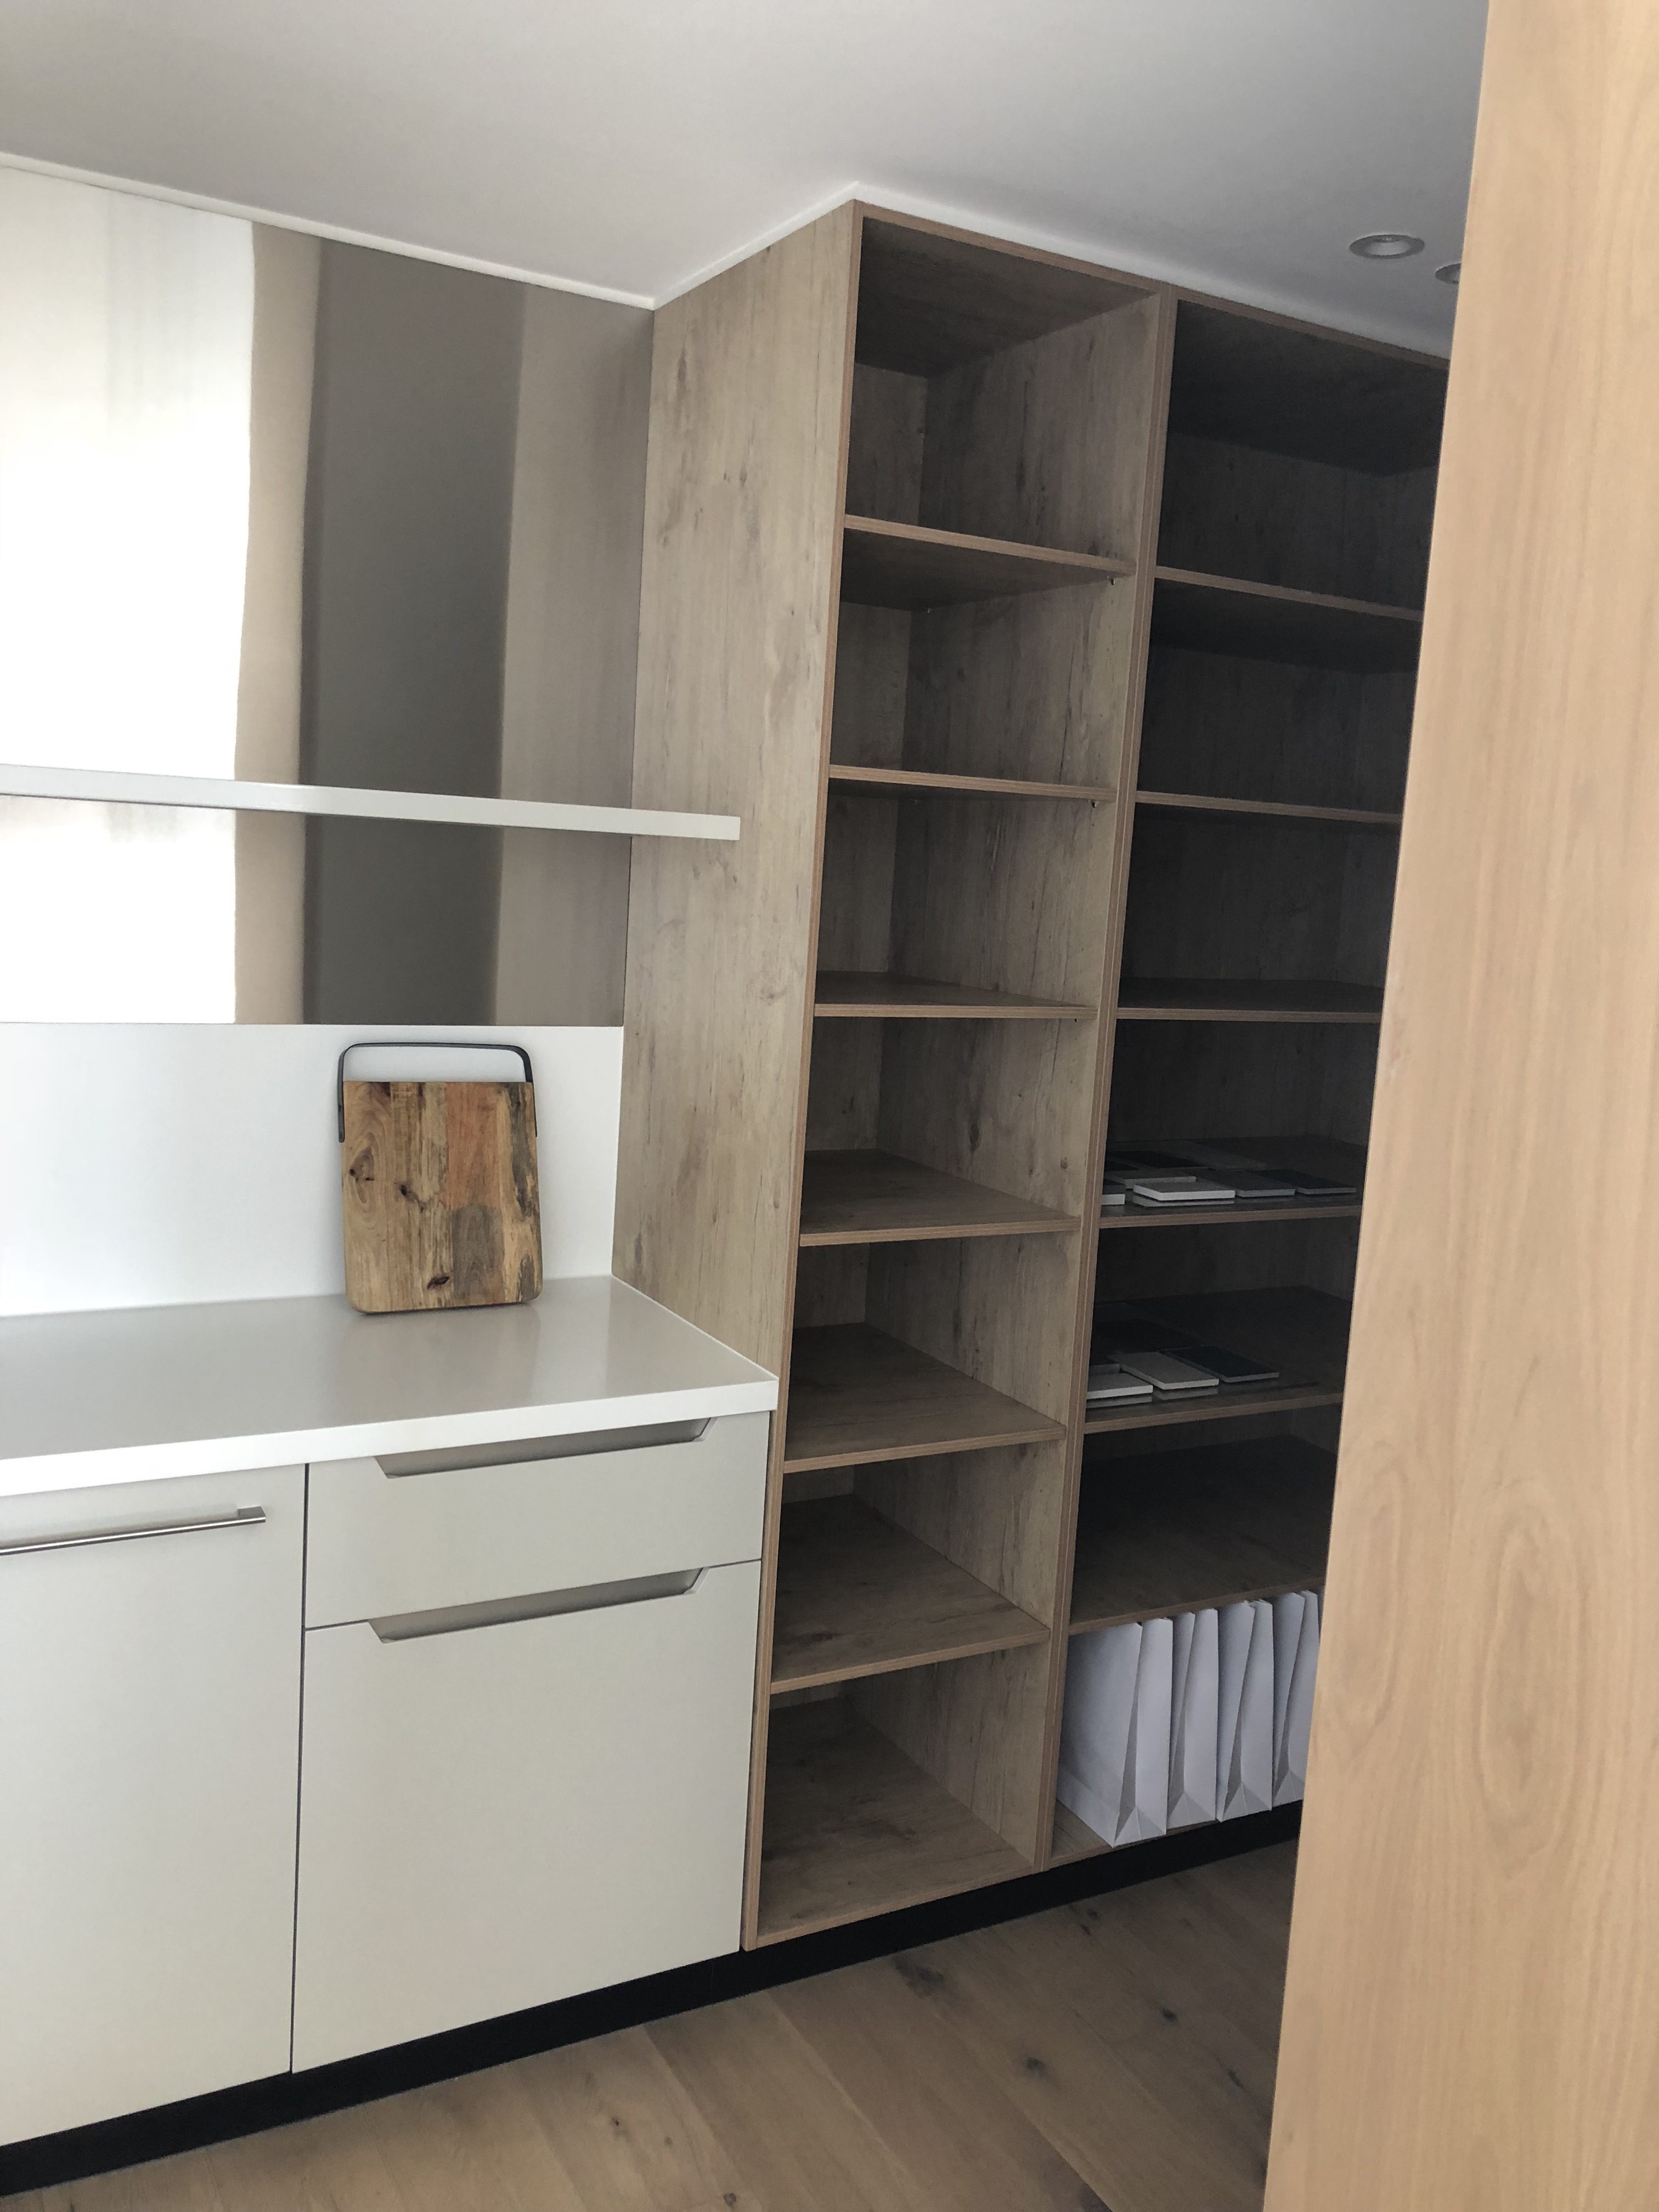 Finishes in the Barca Display Kitchen (taken by PropertyMash on 14/06/18)